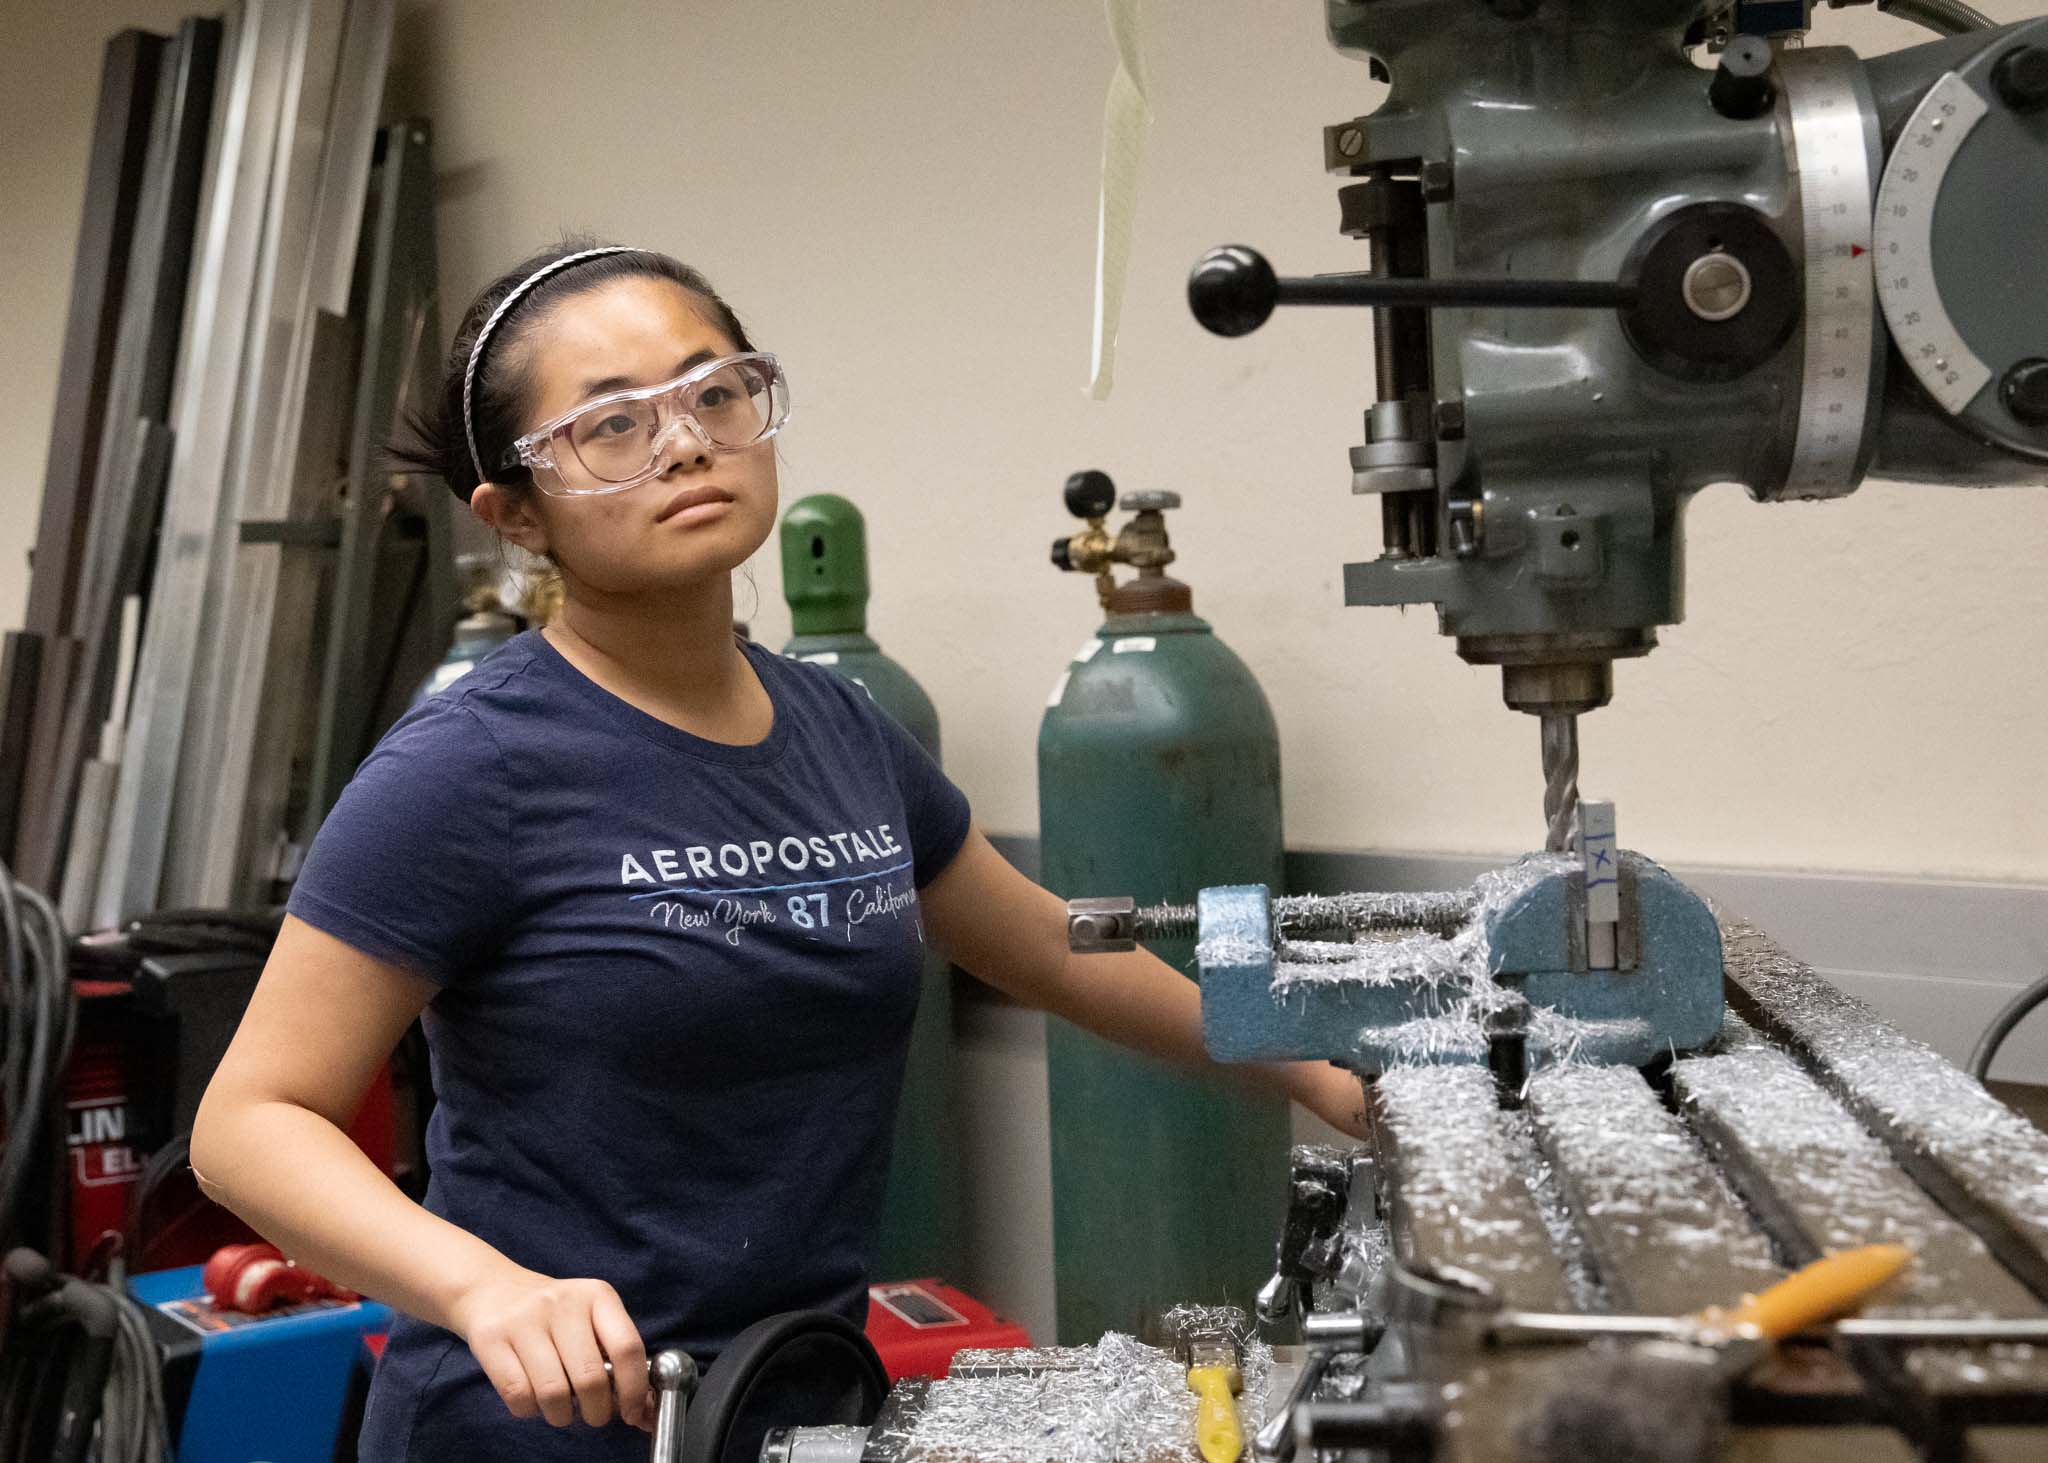 Student uses a large drill in the machine lab.